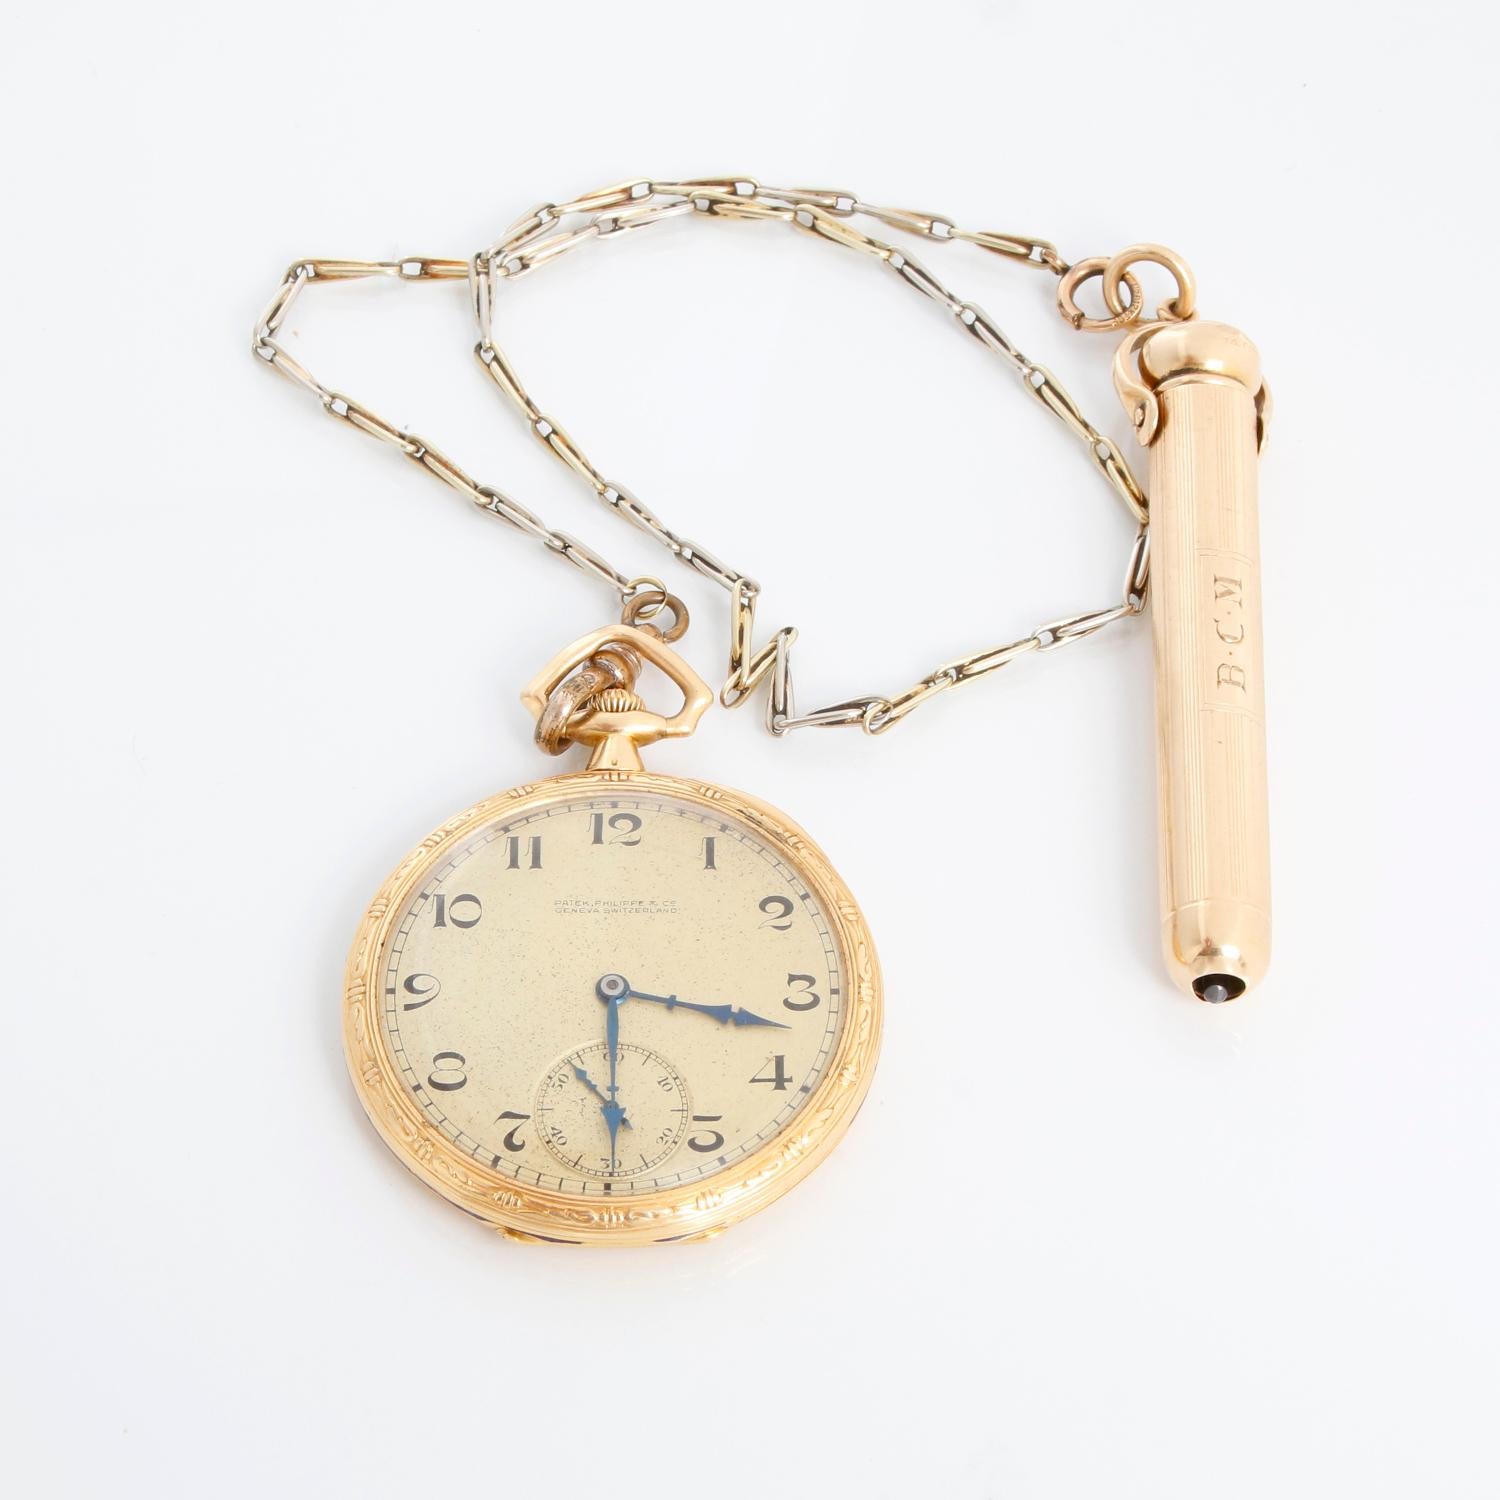 Patek Philippe 18K Yellow Gold Pocket Watch with Pencil & Chain  - Manual winding. 18K Yellow Gold Case engraved with blue enamel  ( 44 mm ). Champagne dial with Arabic numerals and subdial at 6 o'clock. Comes with a 13 inch chain, that is attached